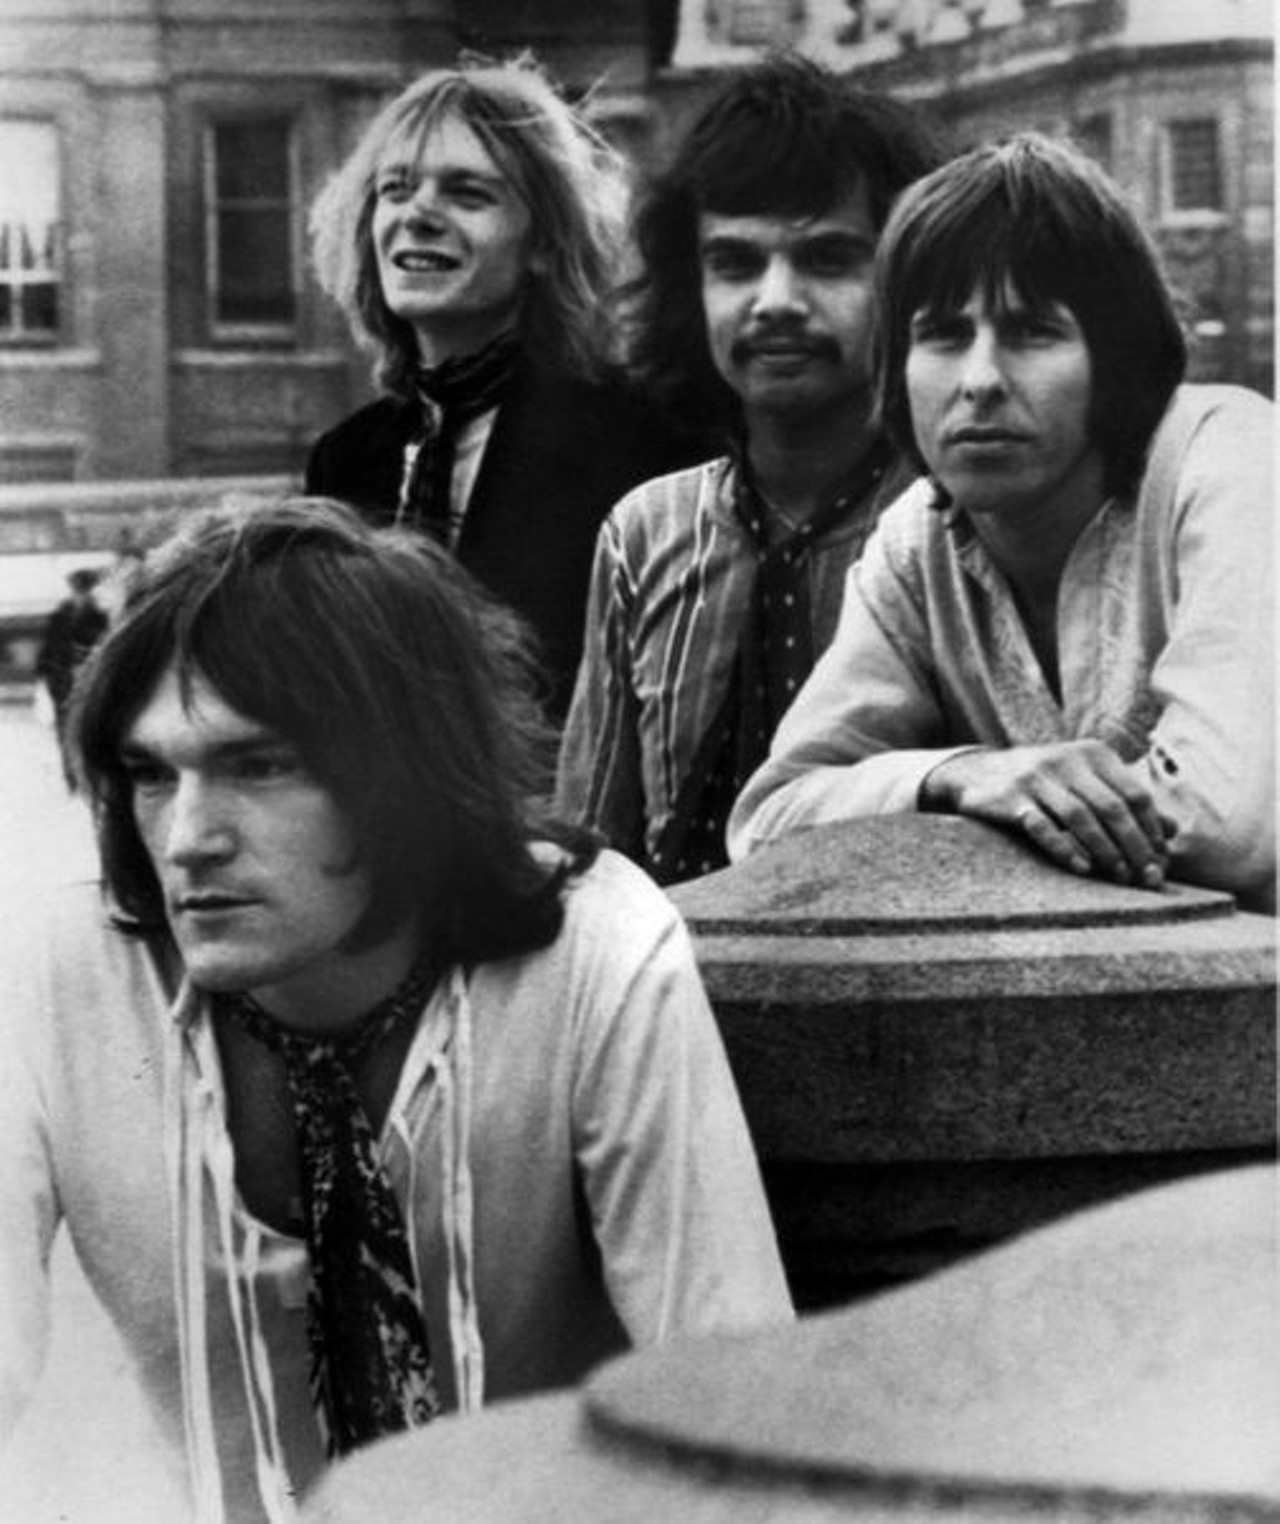 Widely recognized as a pioneer in the jazz-rock and acid-jazz movements, keyboardist Brian Auger started his career on a different track. He began performing at jazz piano bars in his native England in the early ’60s and even won a Melody Maker award for his playing in 1964. But then he discovered the organ and started dressing differently. Once he began wearing Carnaby Street clothes, he fit in more with rock crowds. After playing with guys like Sonny Boy Williamson and Jimmy Page, Auger formed Oblivion Express to further break down the boundaries between rock and jazz. He eventually disbanded the group and planned to support Eric Burdon on a tour, but that didn’t last long. Auger re-launched Oblivion Express in the mid-’90s with son Karma on drums. He makes frequent appearances in Cleveland, which has always supported him, and enjoys sharing stories from his classic-rock past. Tonight’s shows are part of a three-night stand at Nighttown. $25